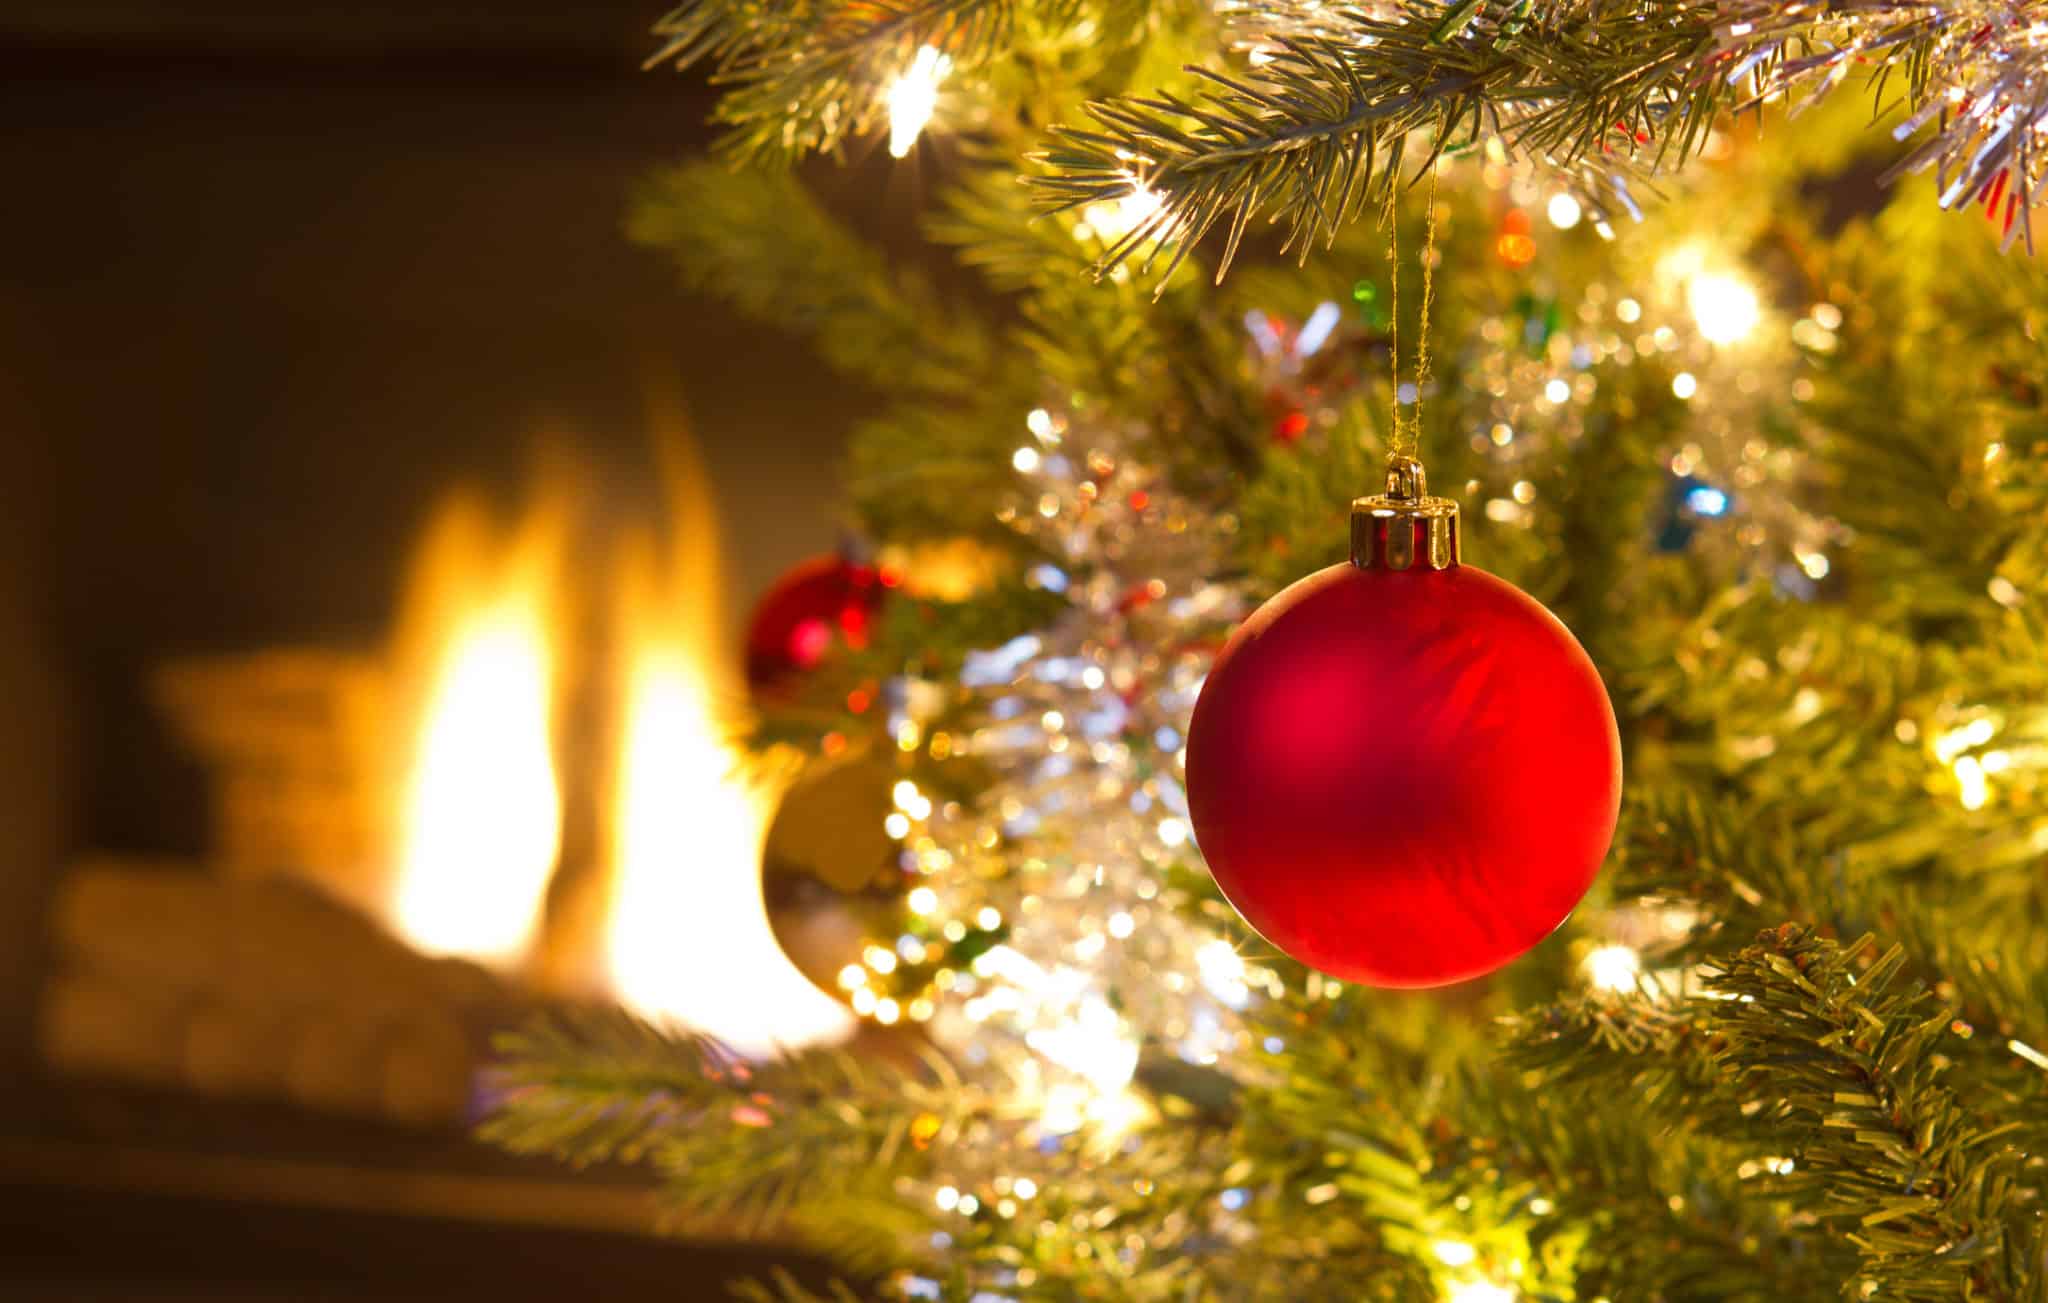 Prevent Christmas Tree Fires With These Safety Tips